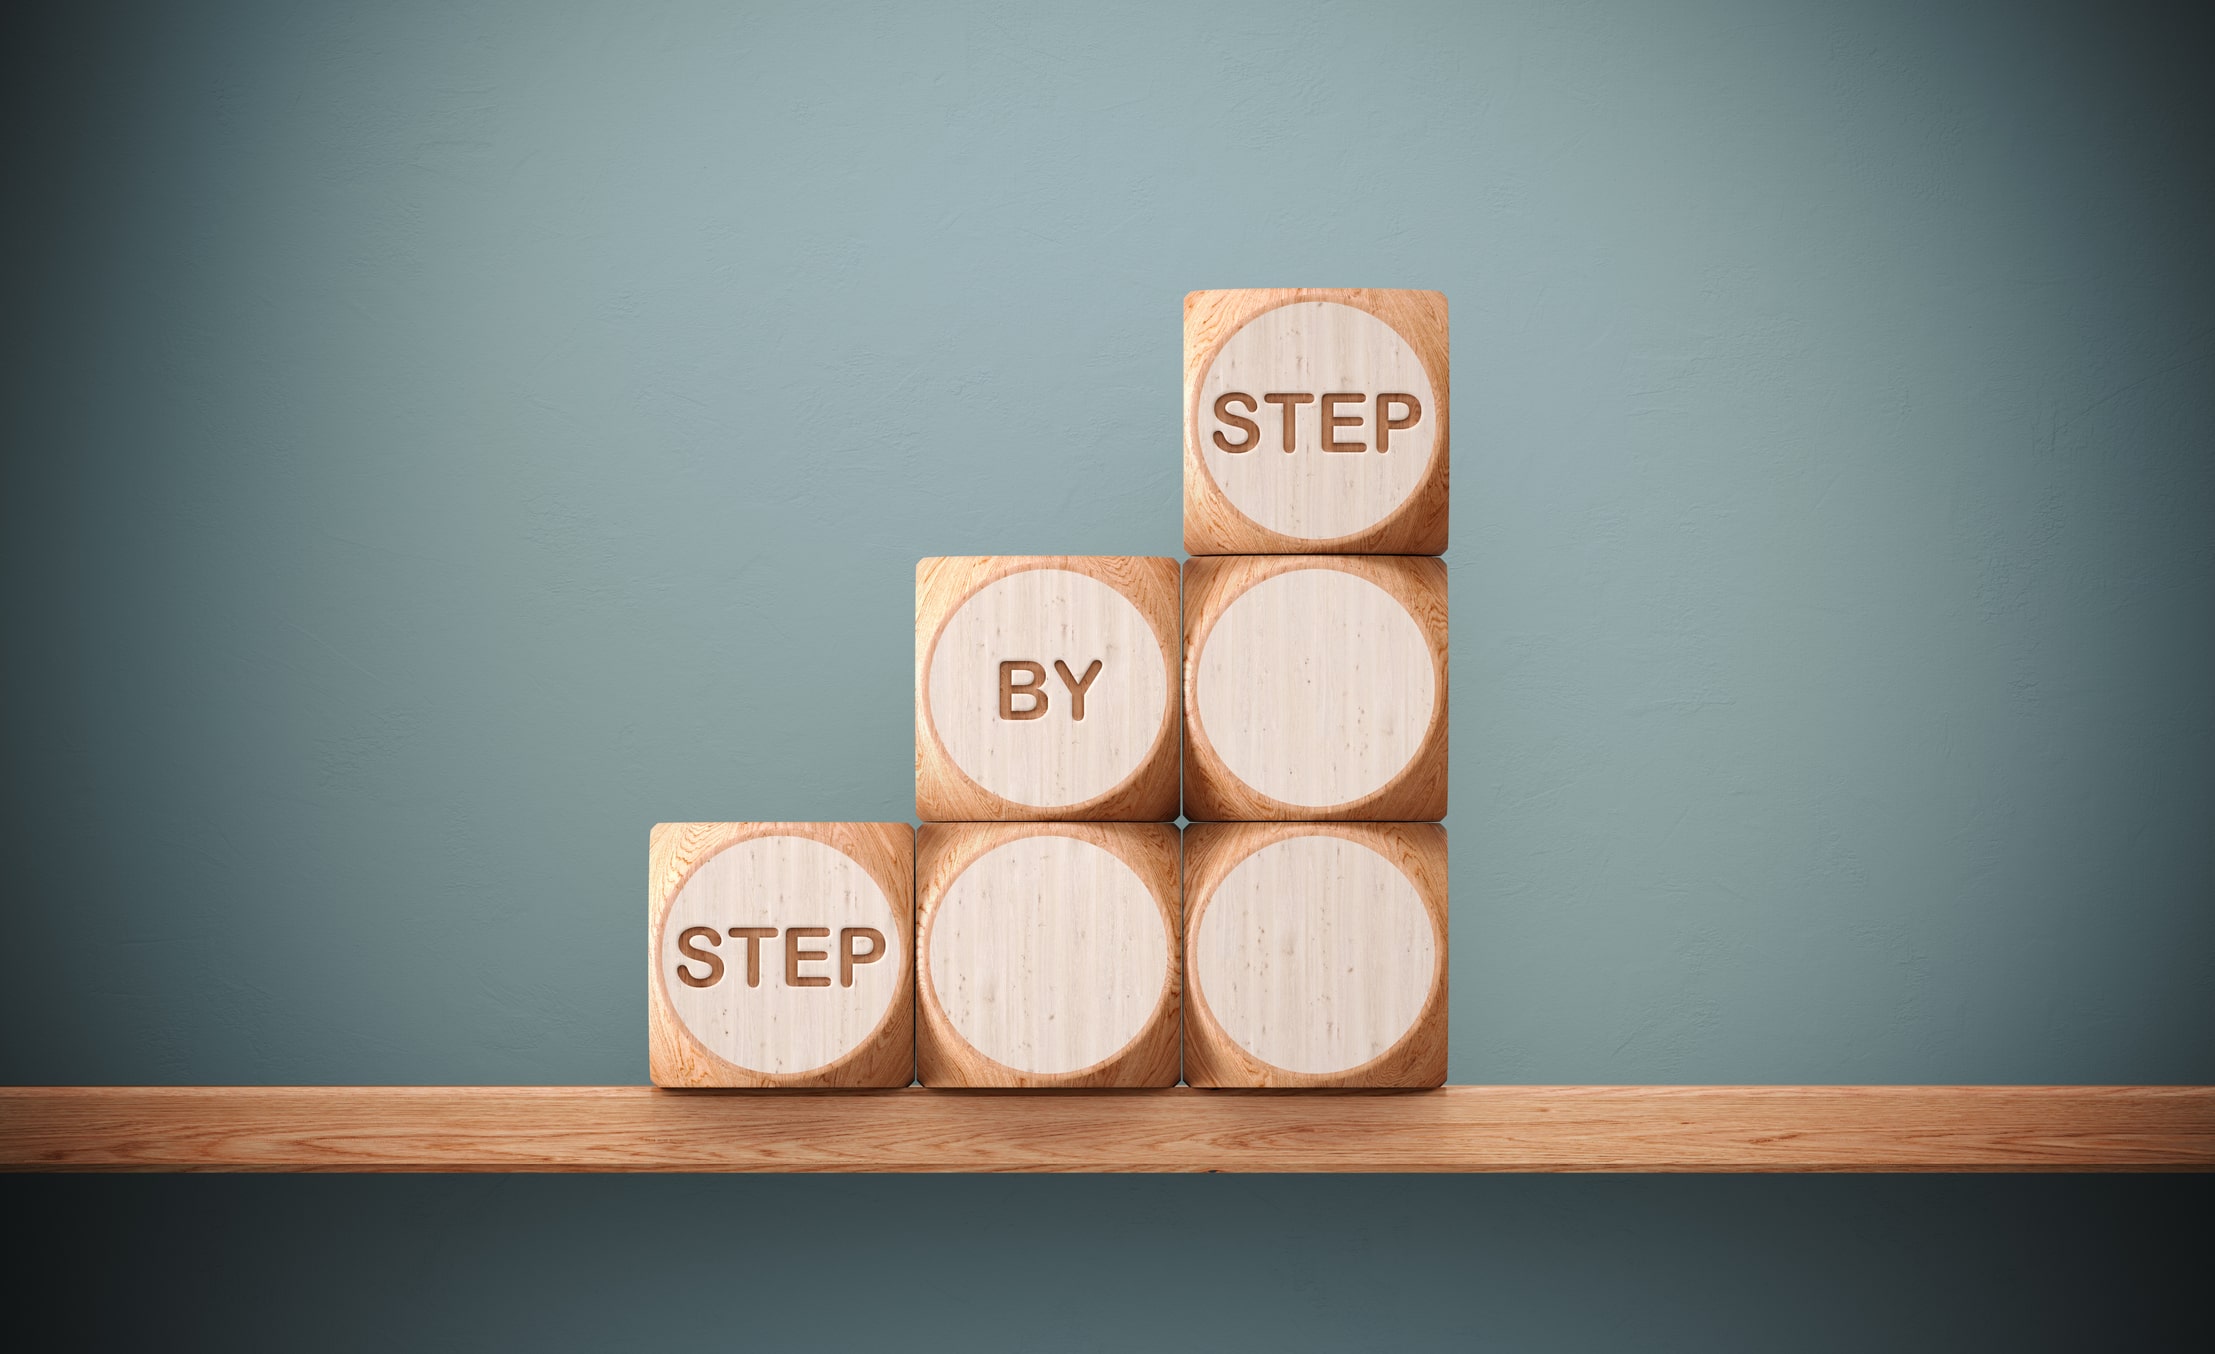 Wooden blocks on a shelf spell out 'STEP BY STEP', symbolizing the structured approach to achieving success